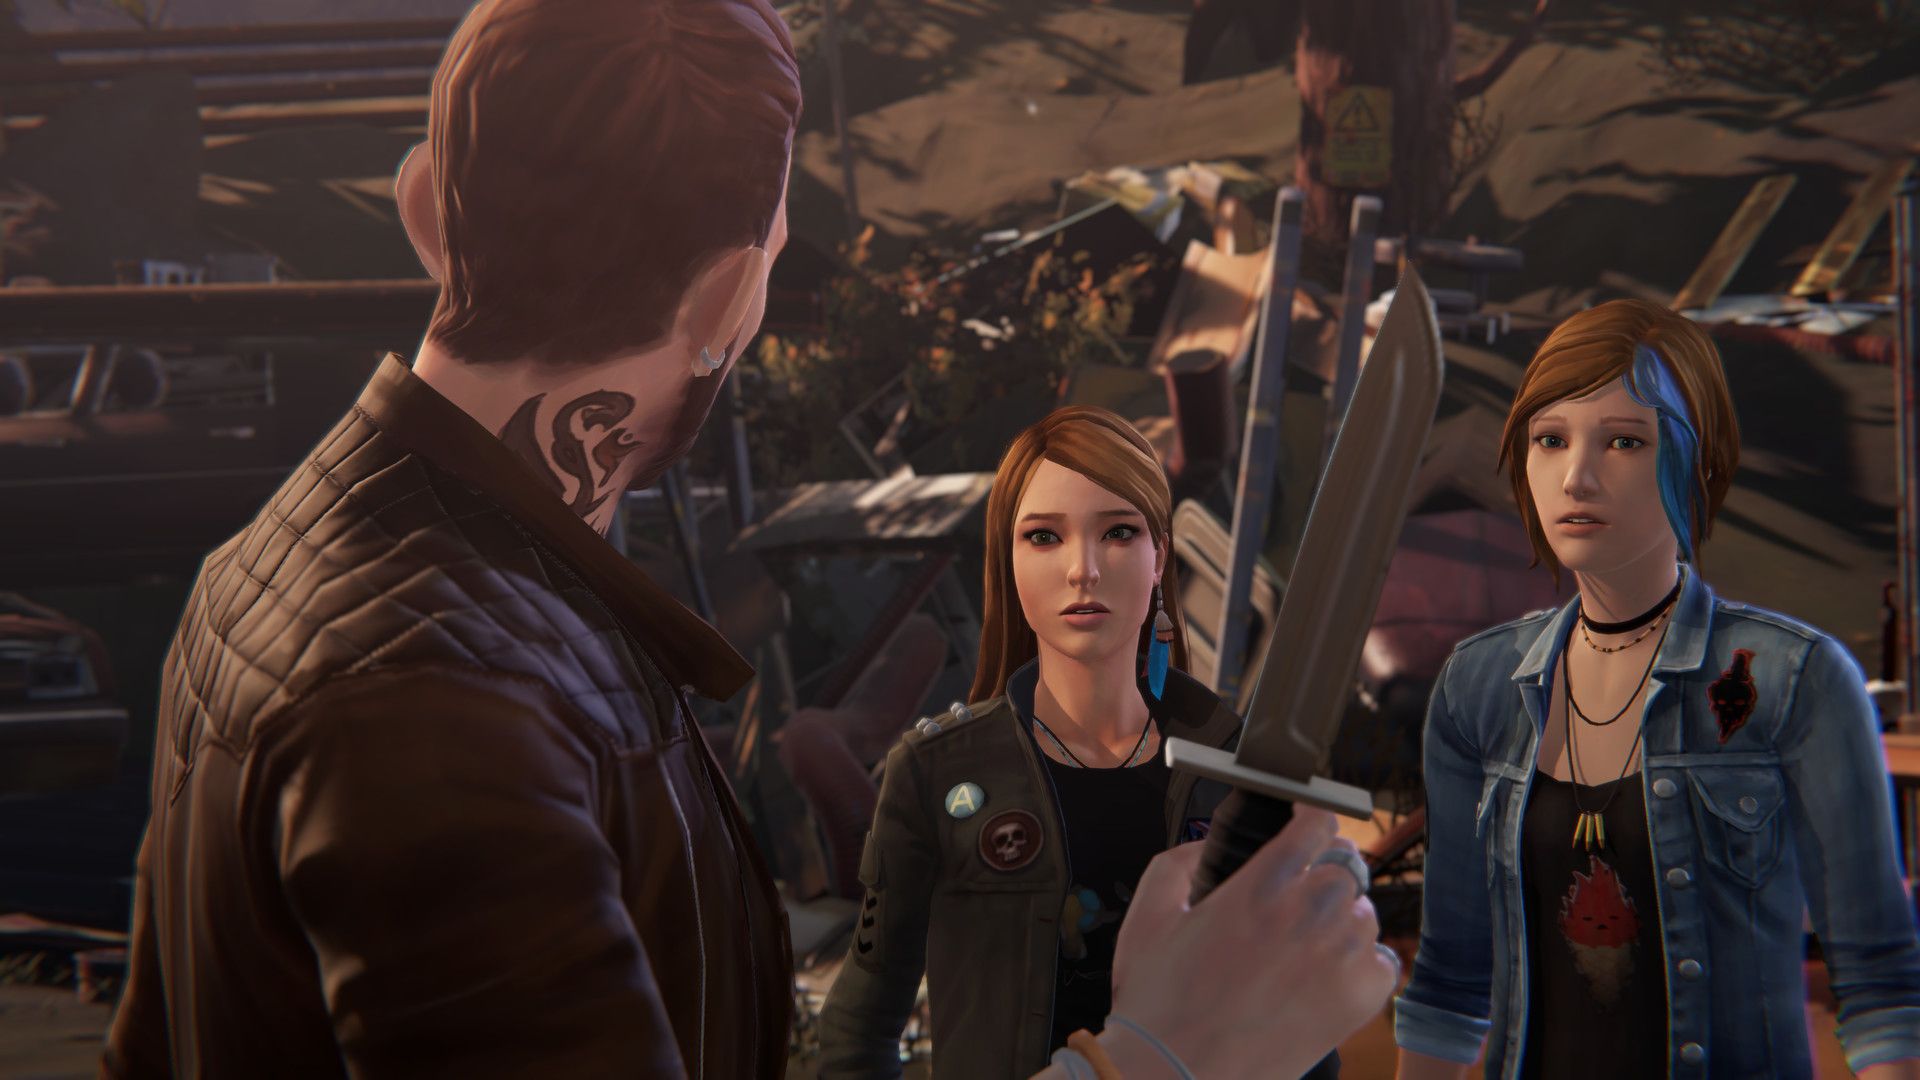 Life is Strange: Before the Storm Episode 3 on Steam